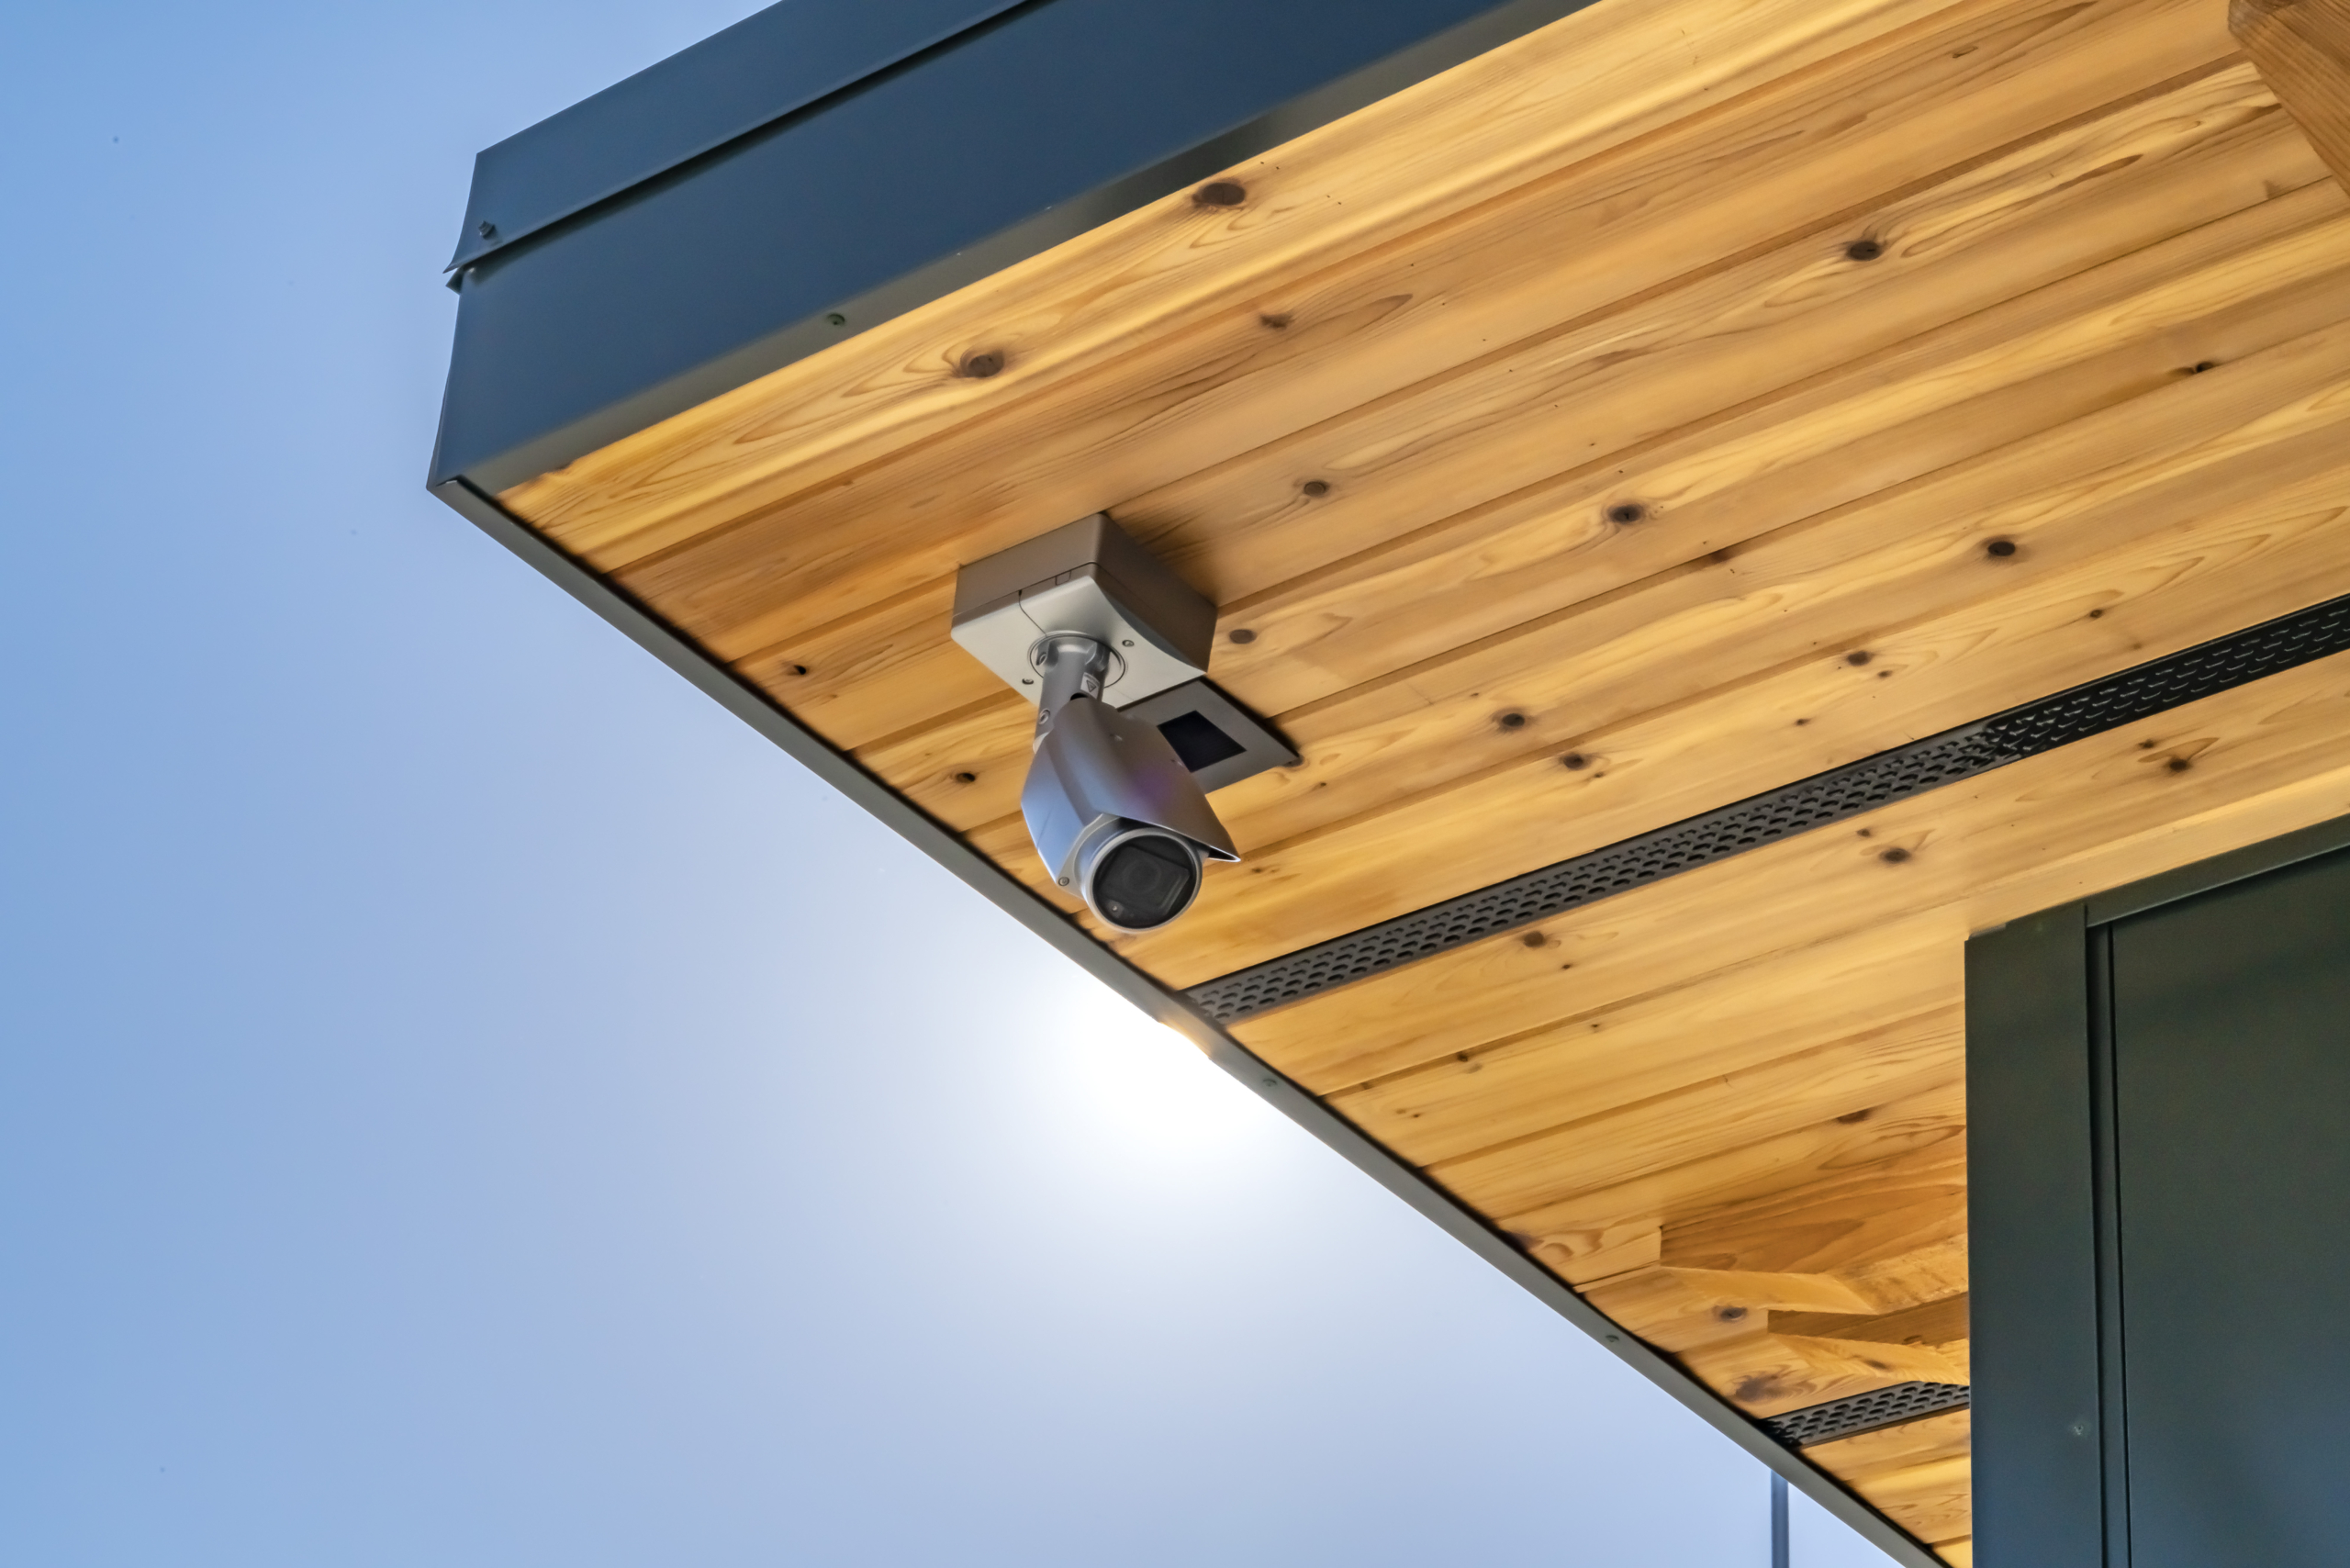 Home with security camera installed on the wooden underside of its roof